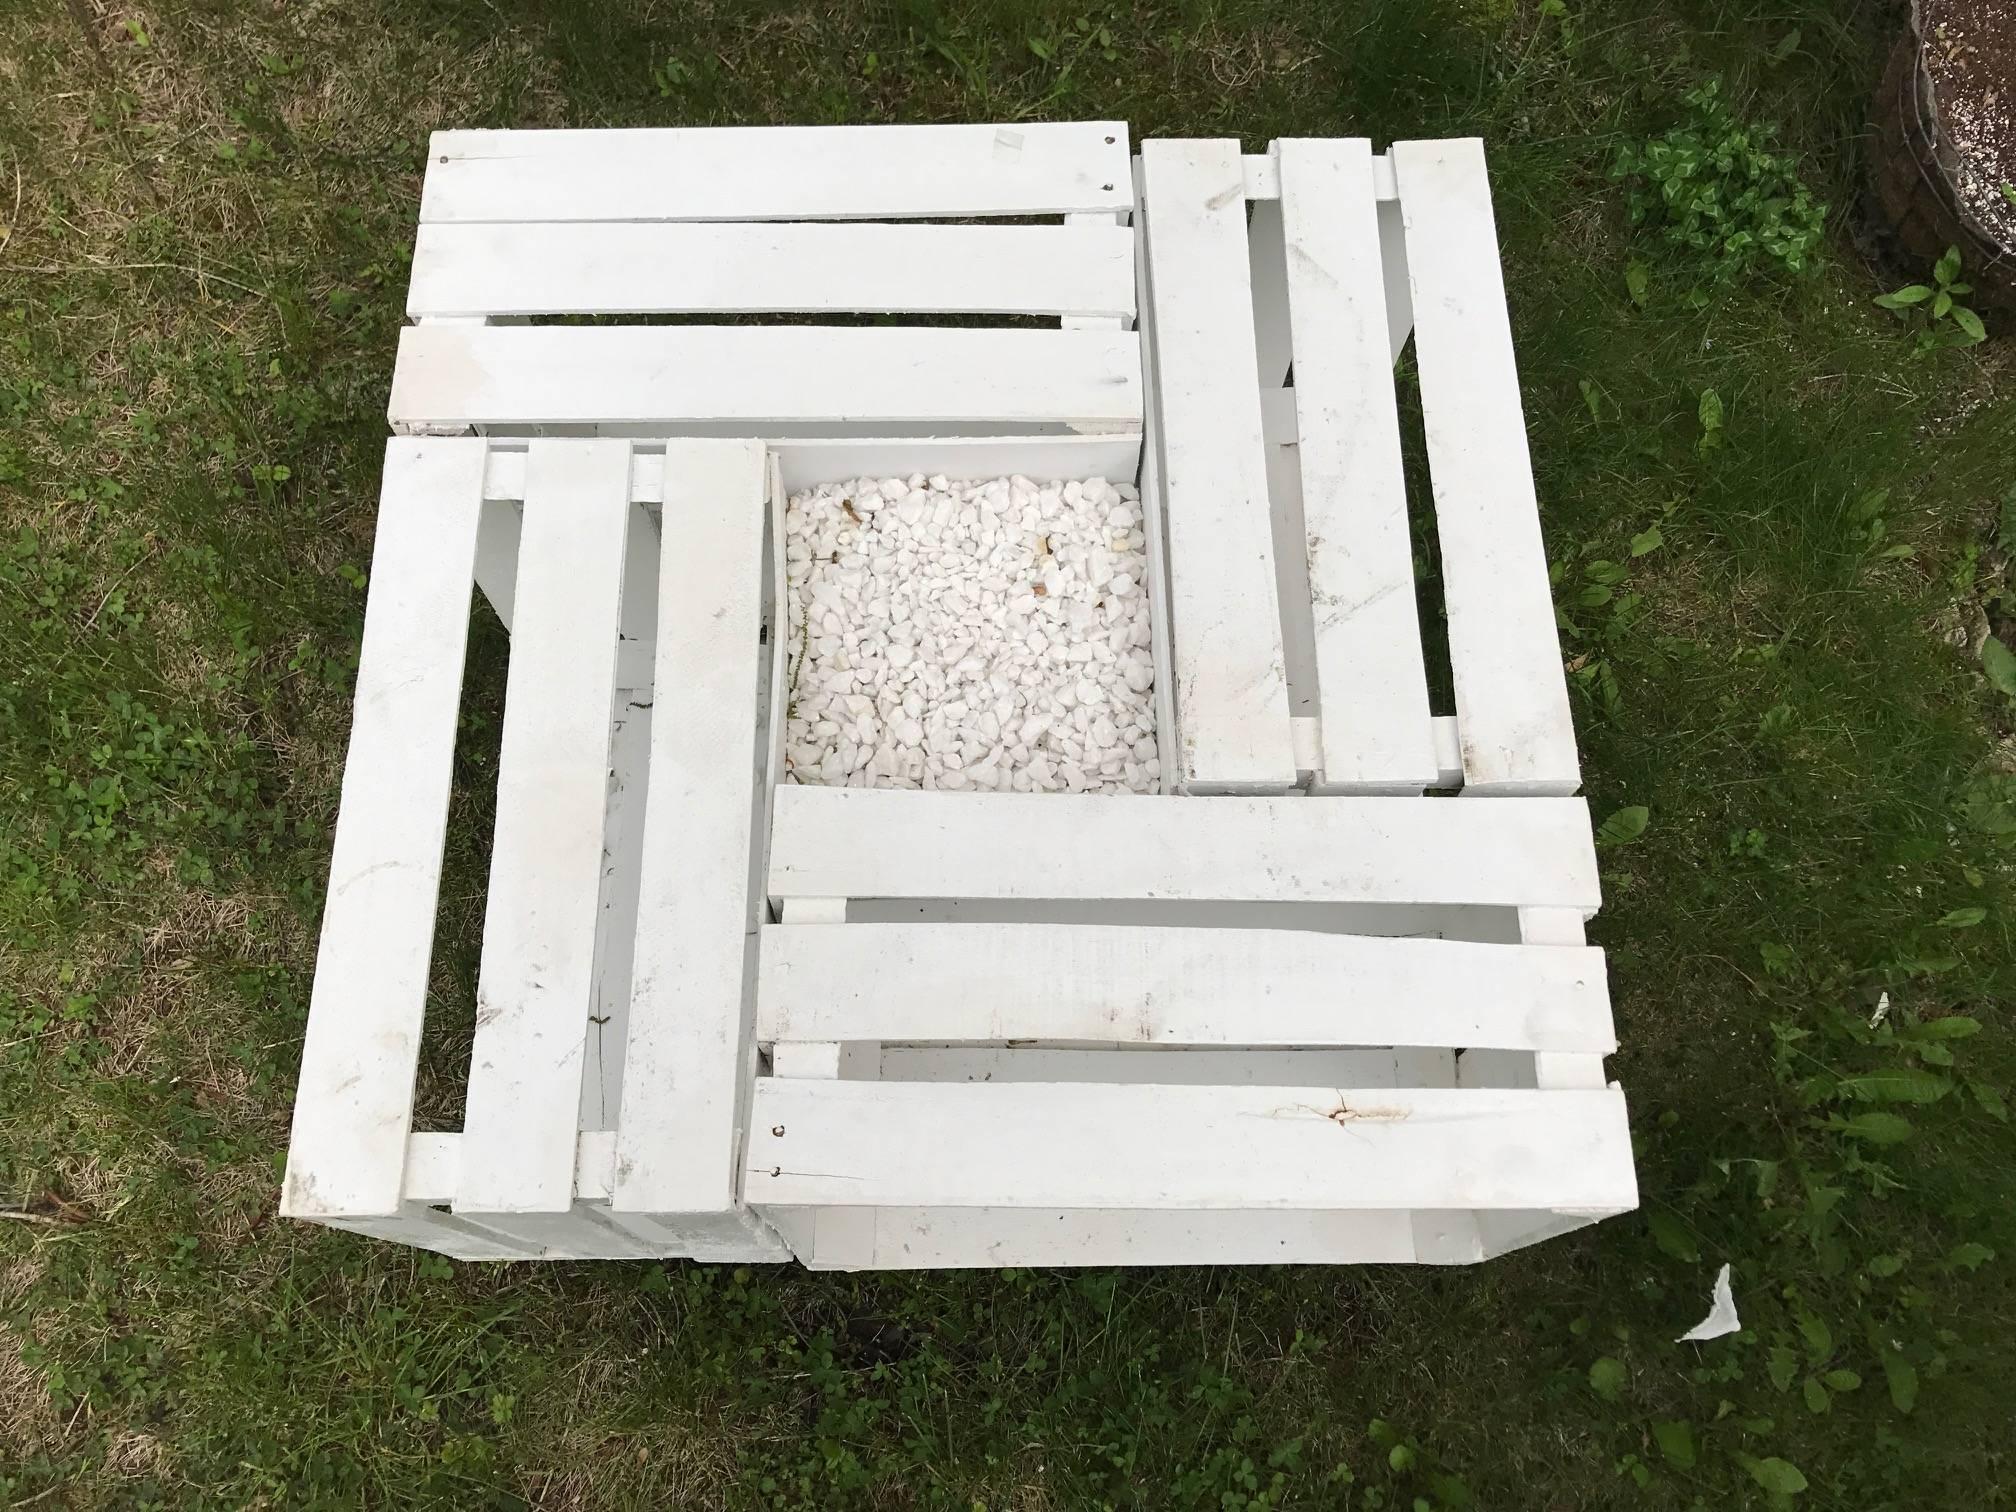 Handmade outdoor pallet wood painted white with gravel center table. This has a cool shape and interior shelves. A great rustic outdoor addition.